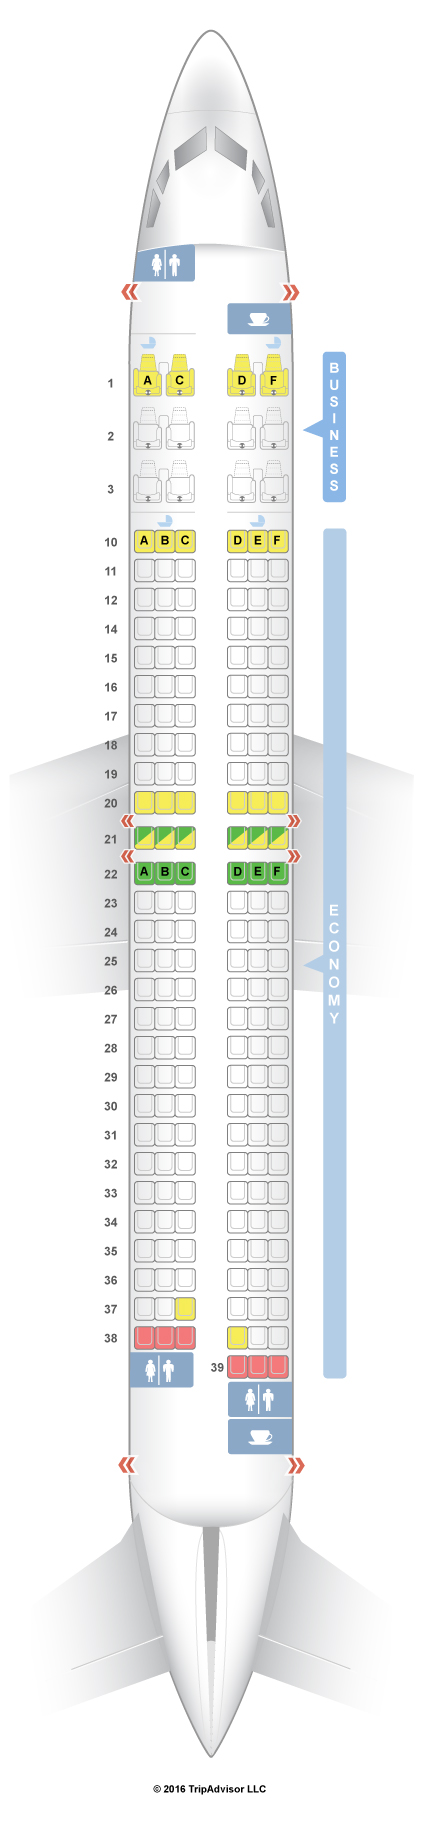 Boeing 737 900 Seating Chart United Airlines